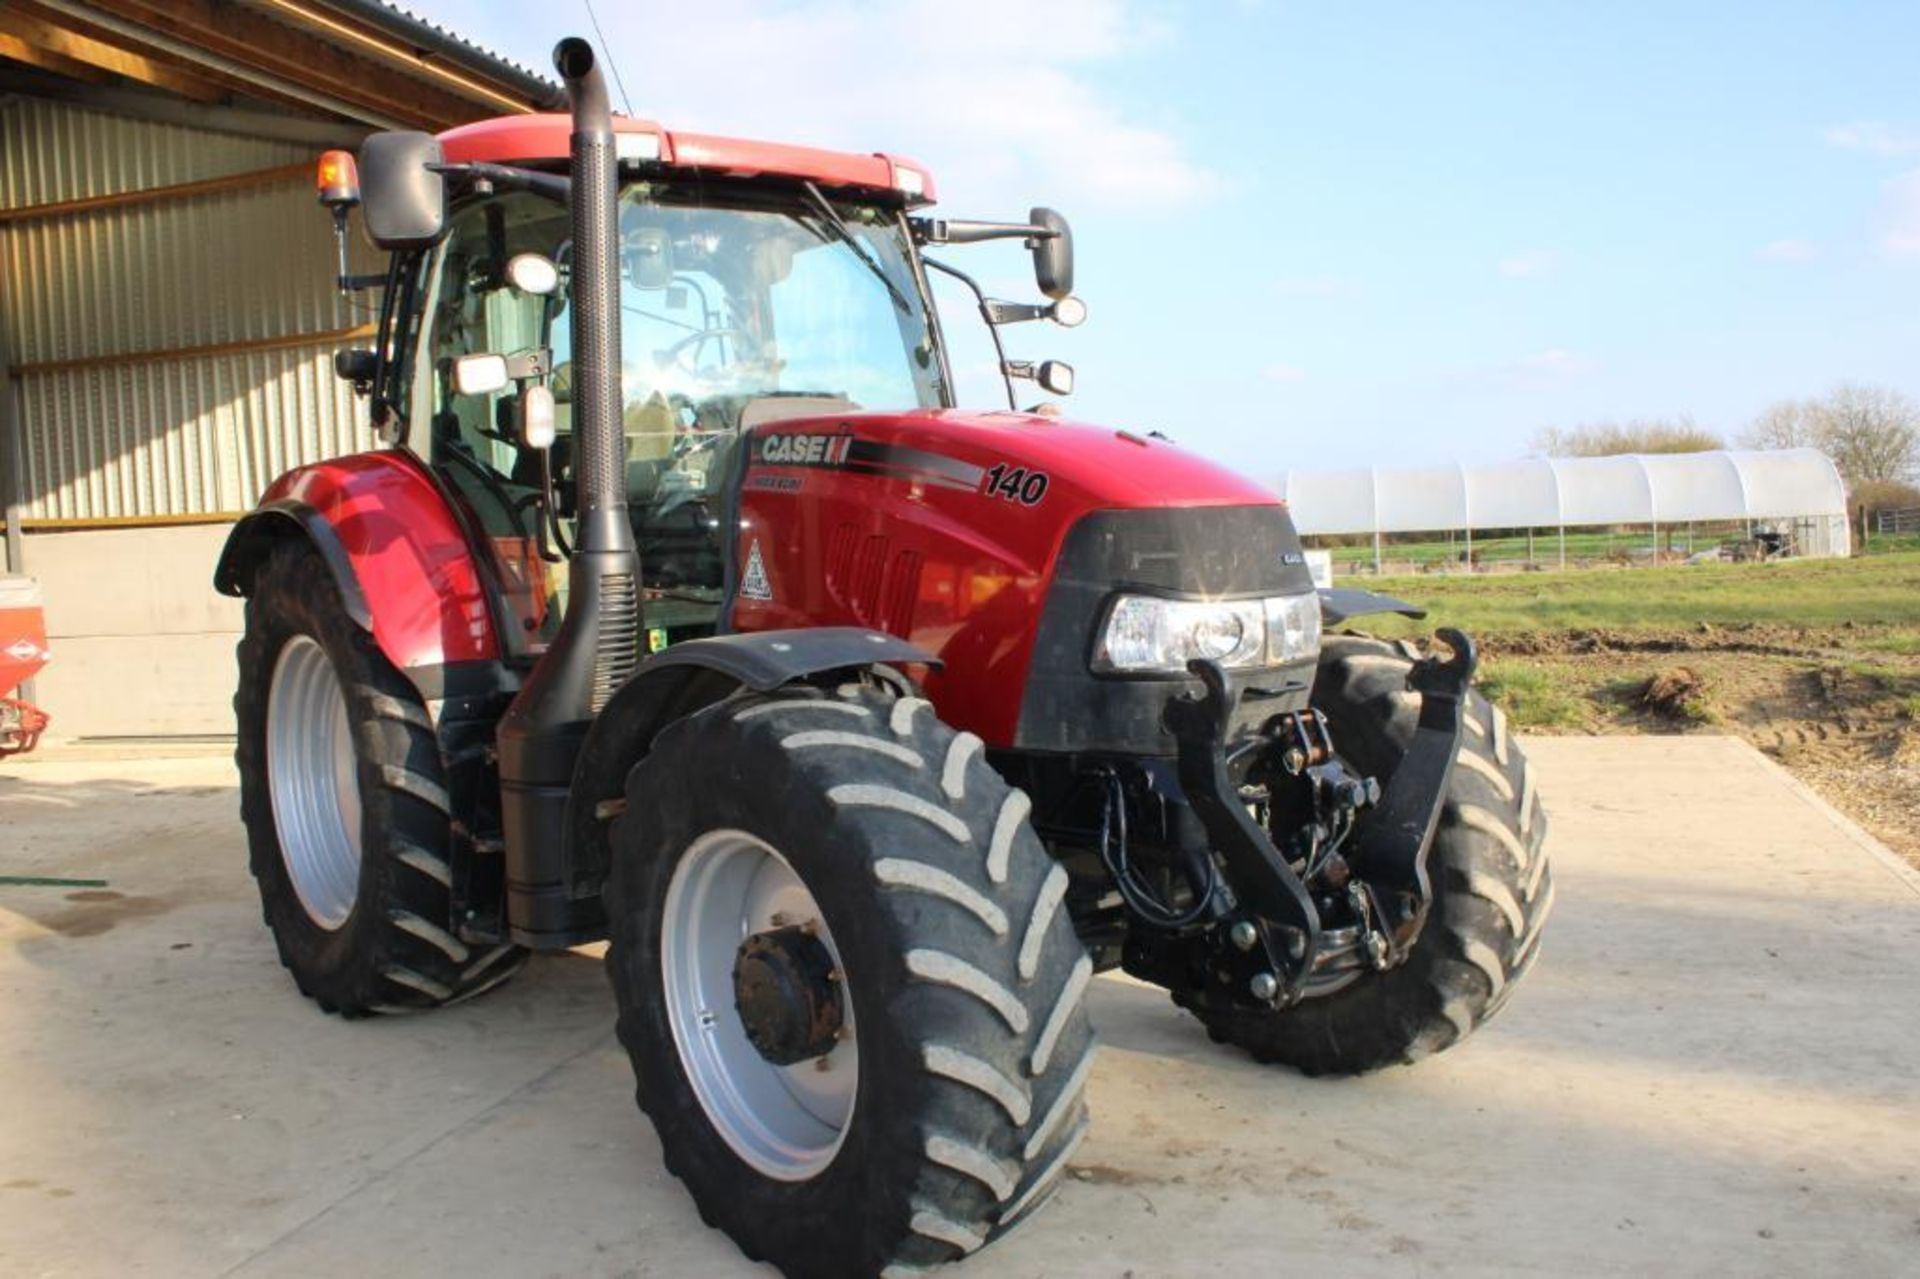 2013 Case Maxxum 140 50kph 4wd Powershift tractor with multicontroller joystick, front linkage, cab - Image 22 of 40